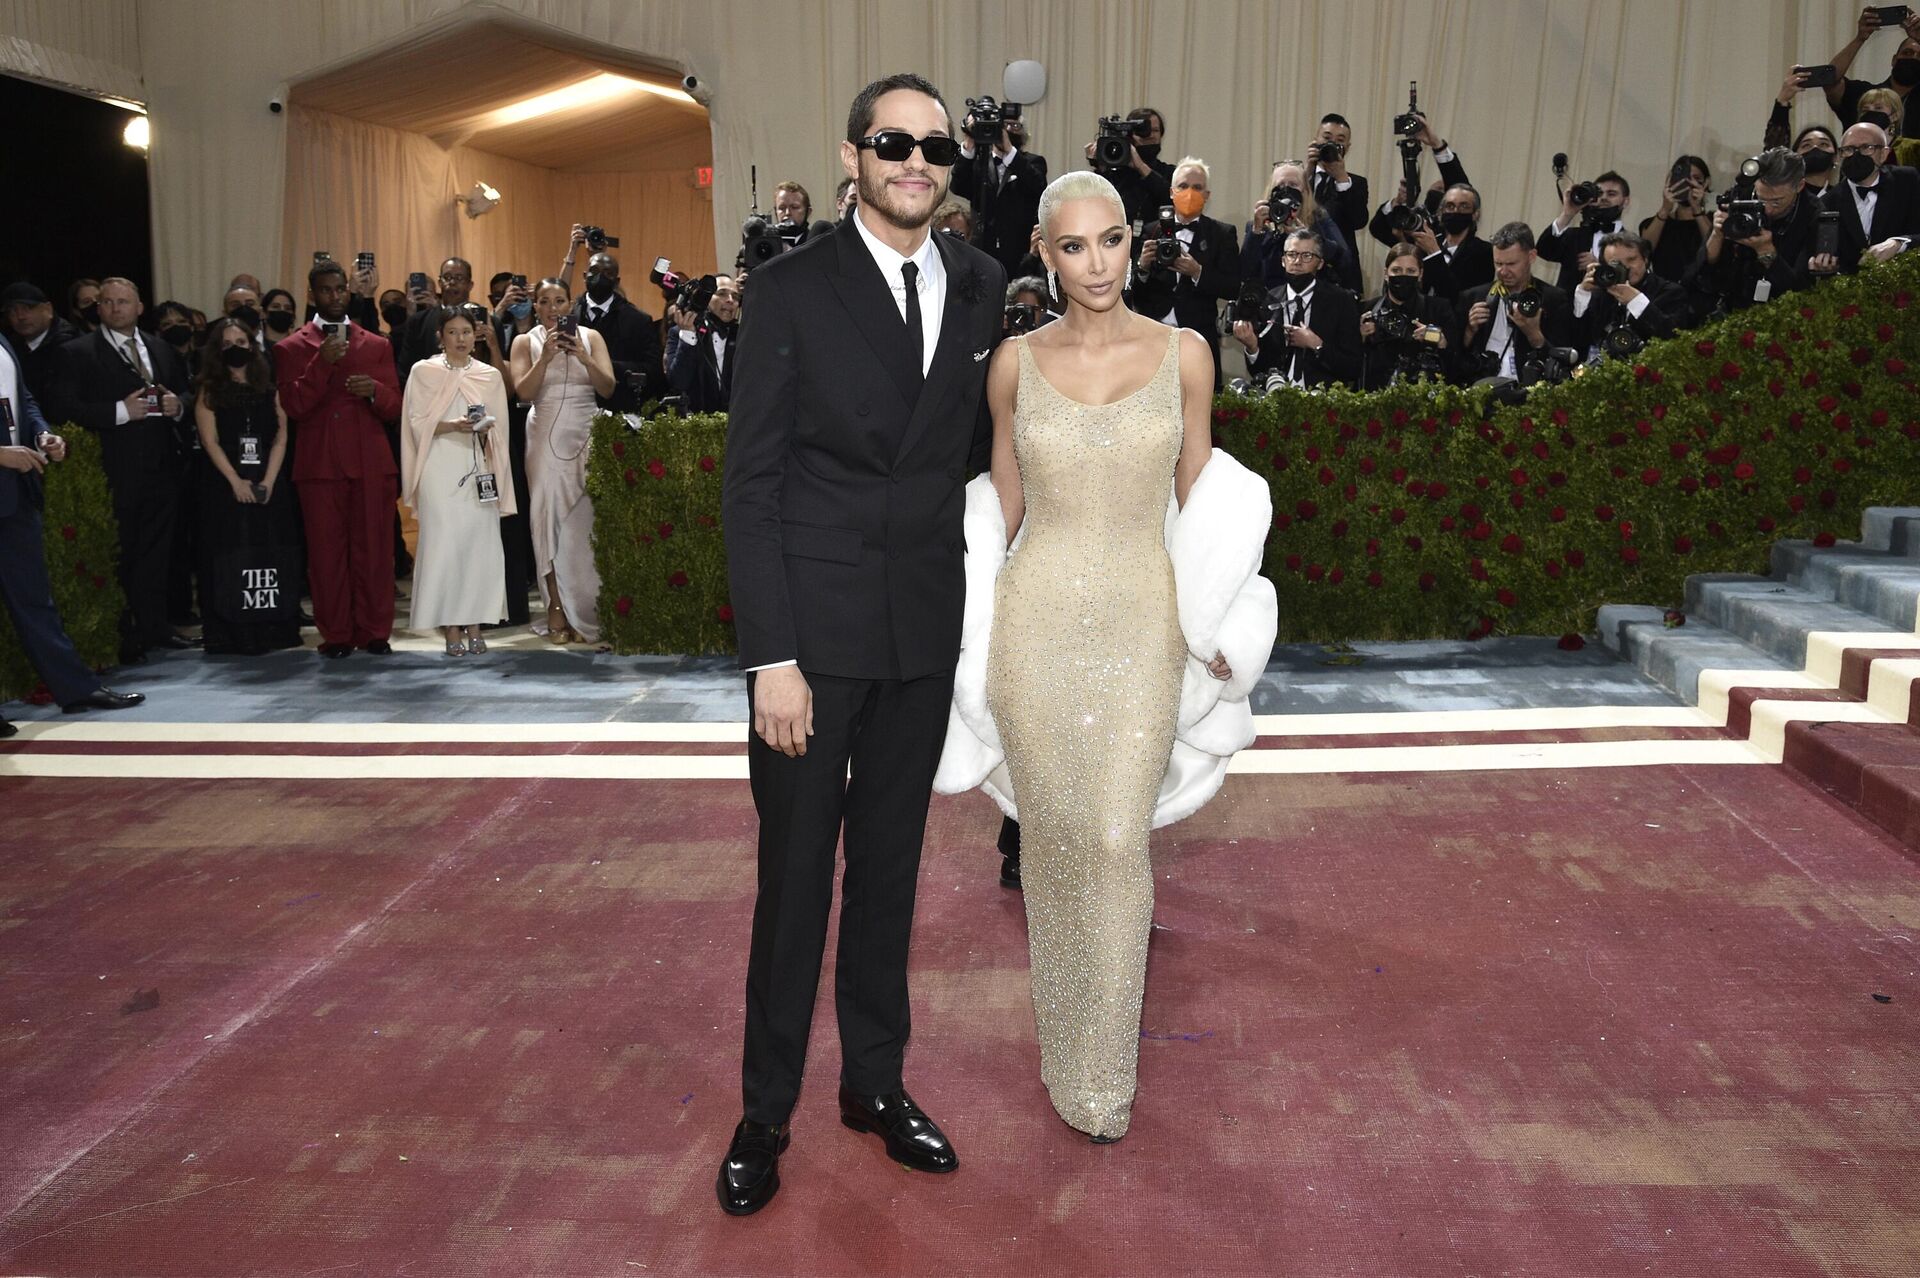 Kim Kardashian, right, and Pete Davidson attend The Metropolitan Museum of Art's Costume Institute benefit gala celebrating the opening of the In America: An Anthology of Fashion exhibition on Monday, May 2, 2022, in New York. - Sputnik International, 1920, 23.12.2022